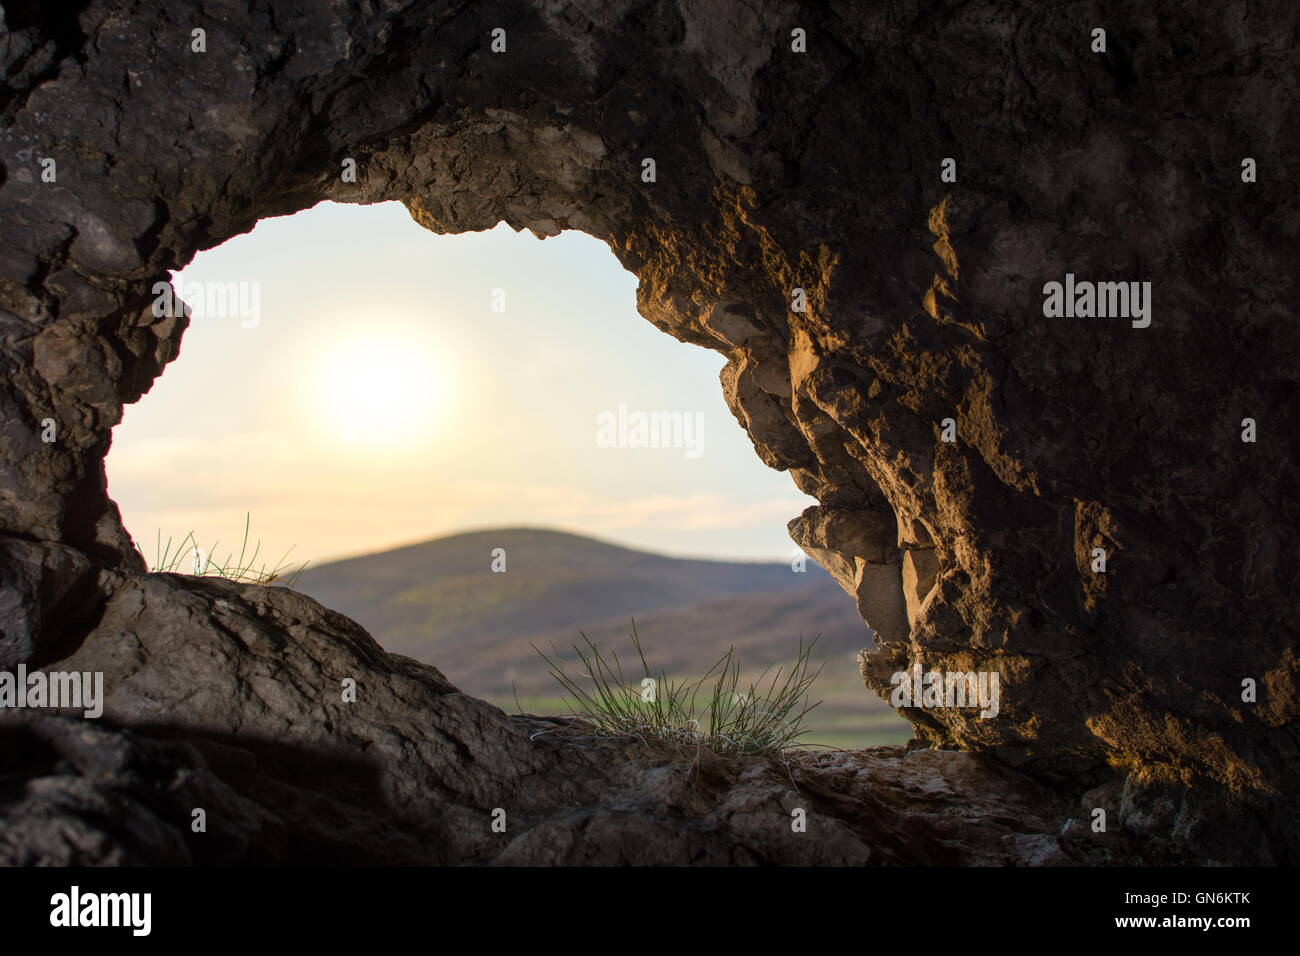 looking thru a natual cave opening Stock Photo